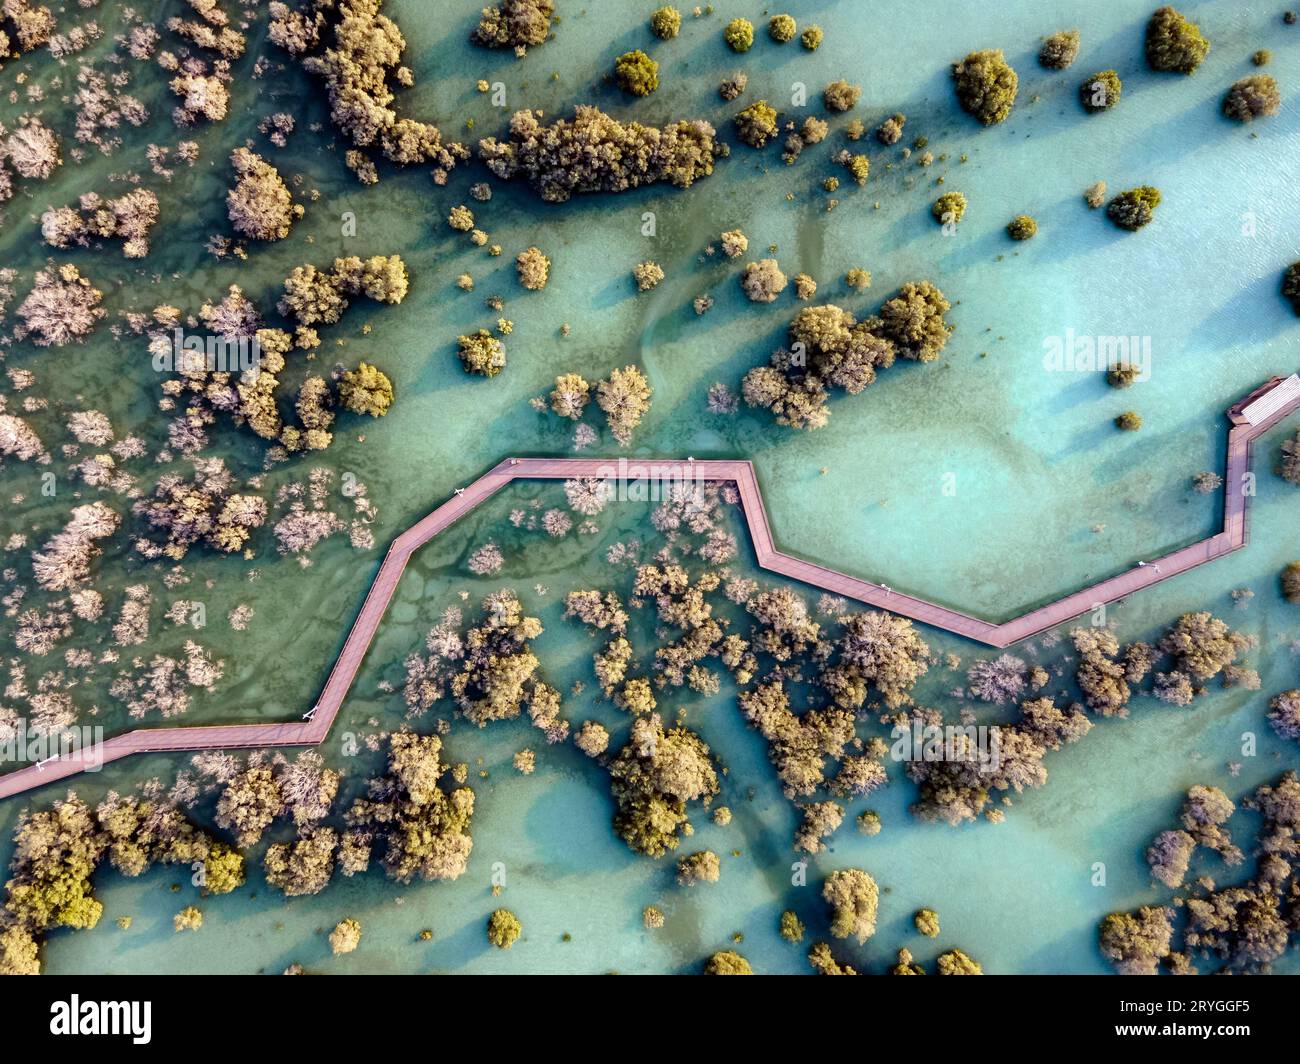 Aerial view of mangroves in Abu Dhabi. Special eco system, natural environment. Stock Photo